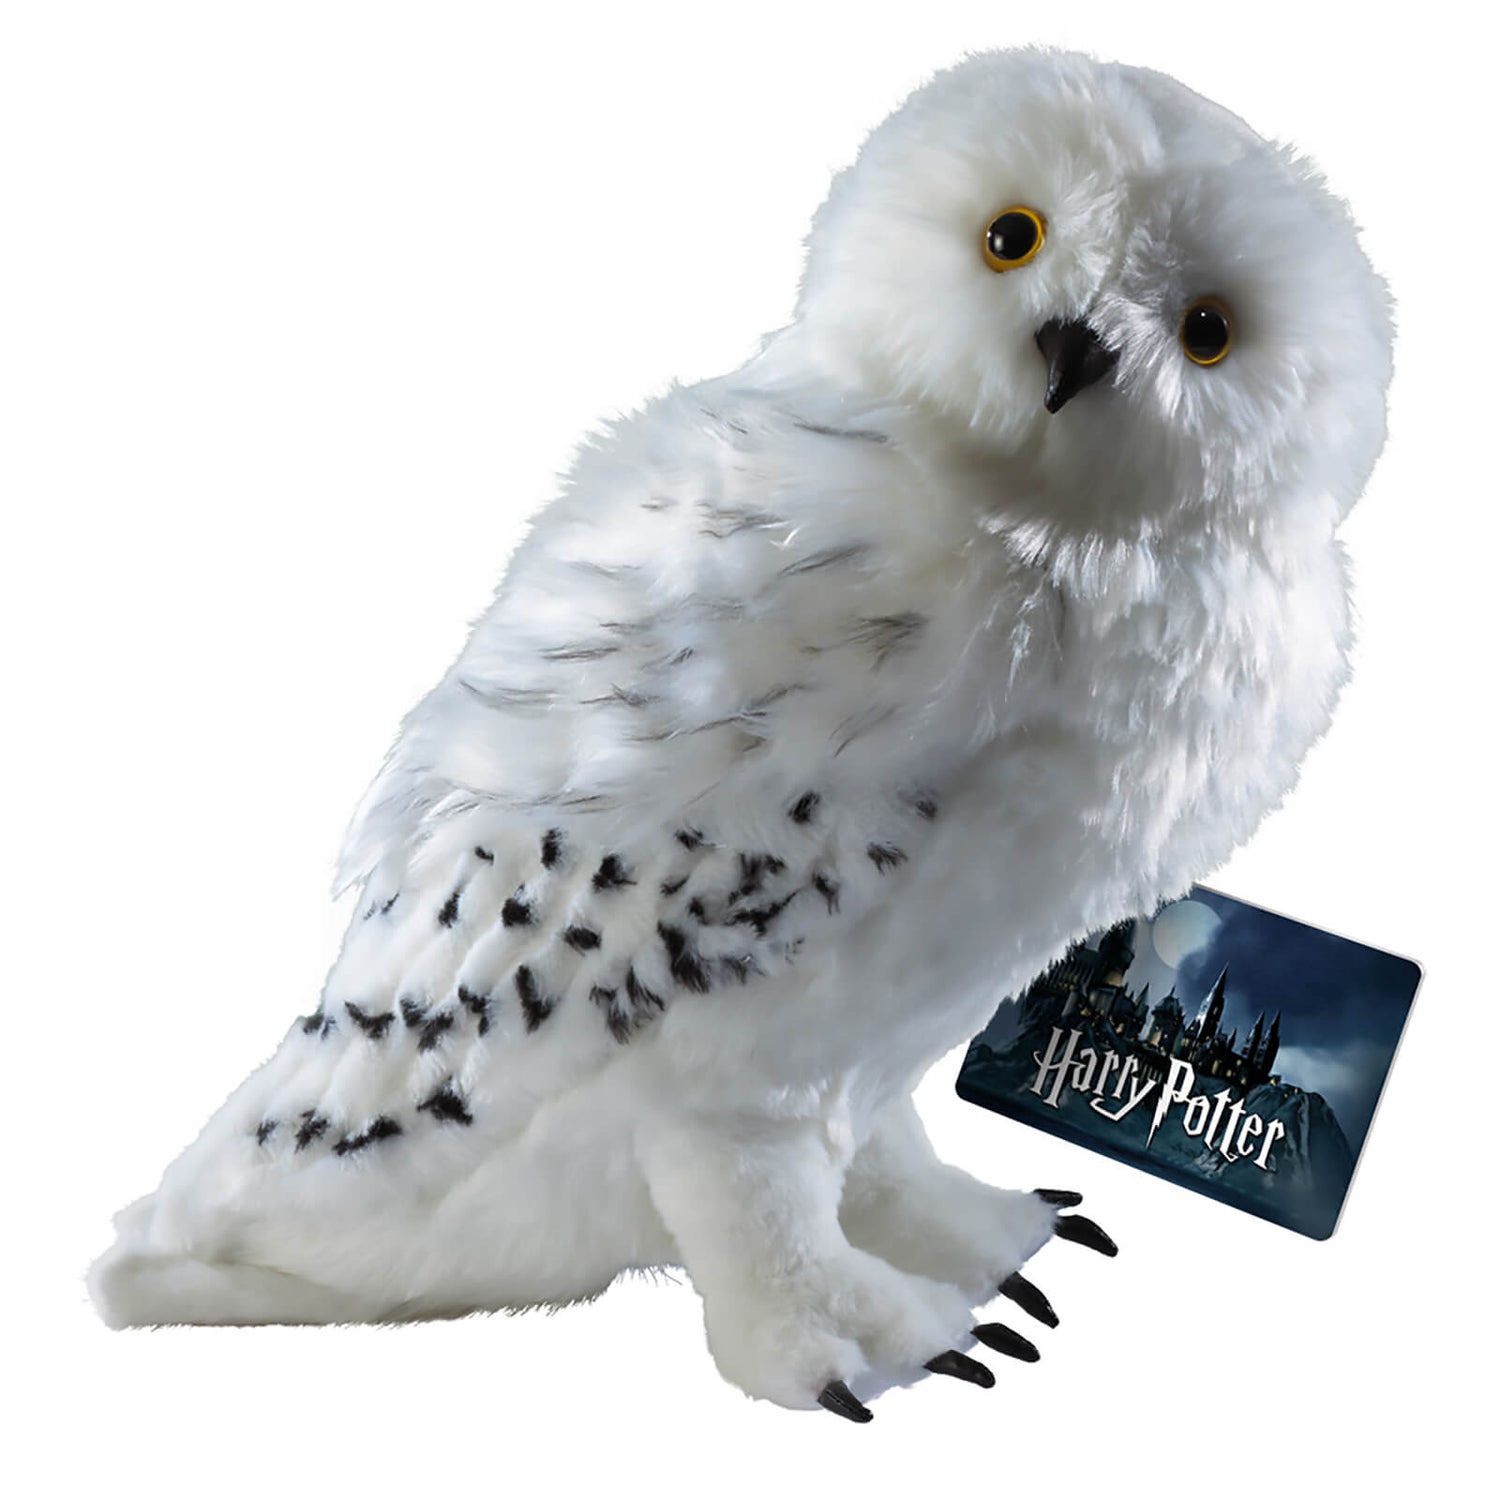 Harry Potter Hedwig Collector's Plush